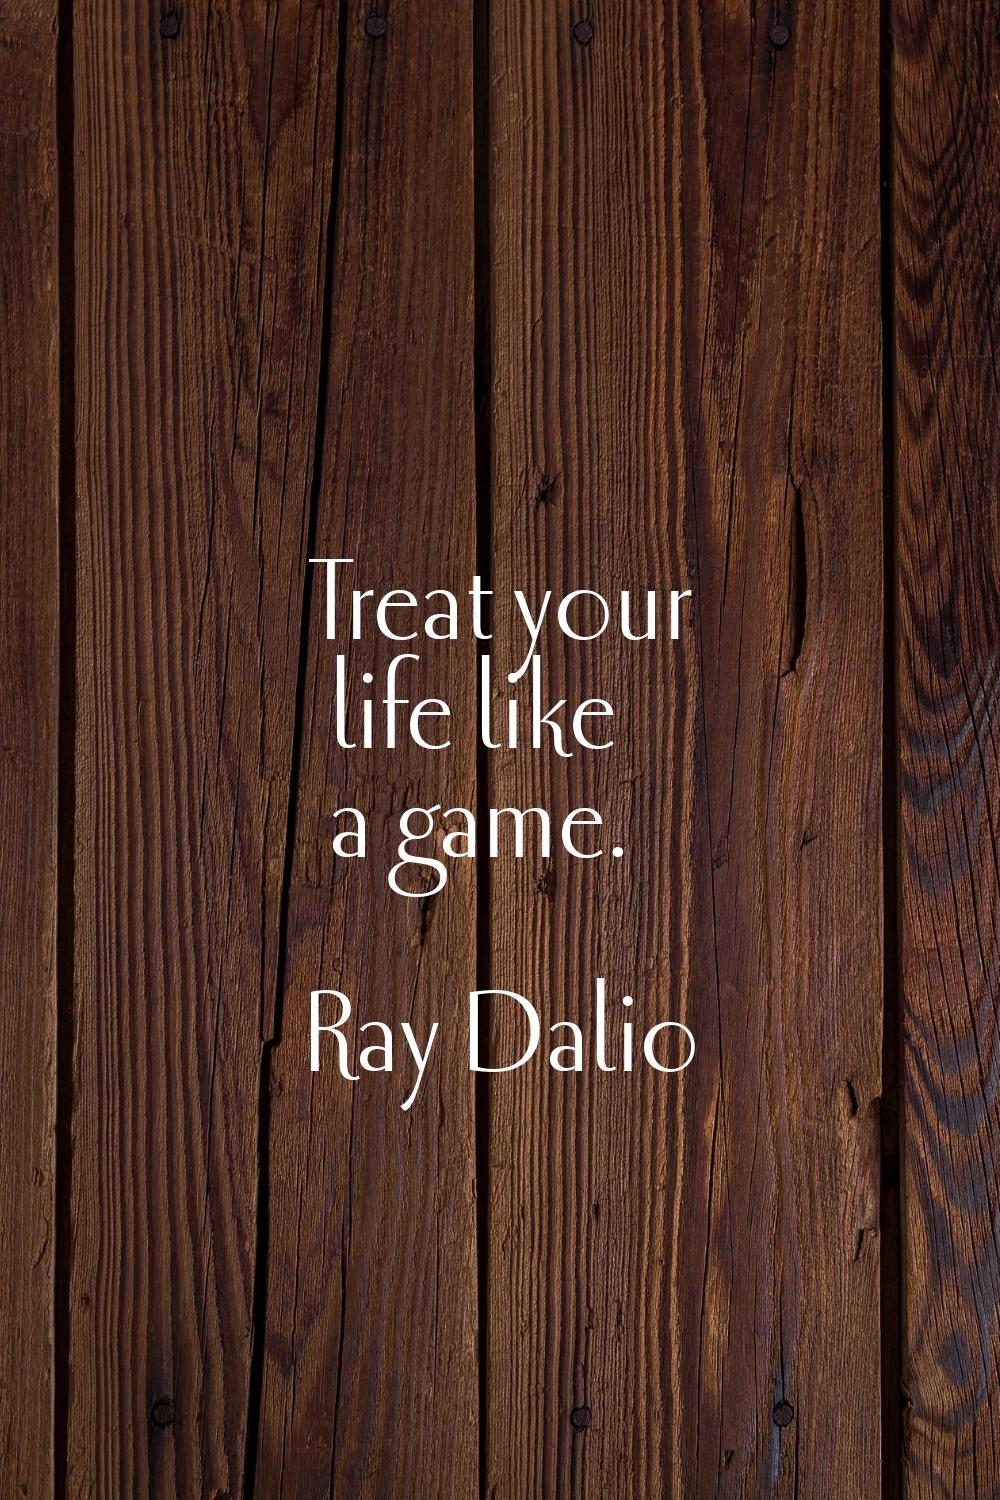 Treat your life like a game.